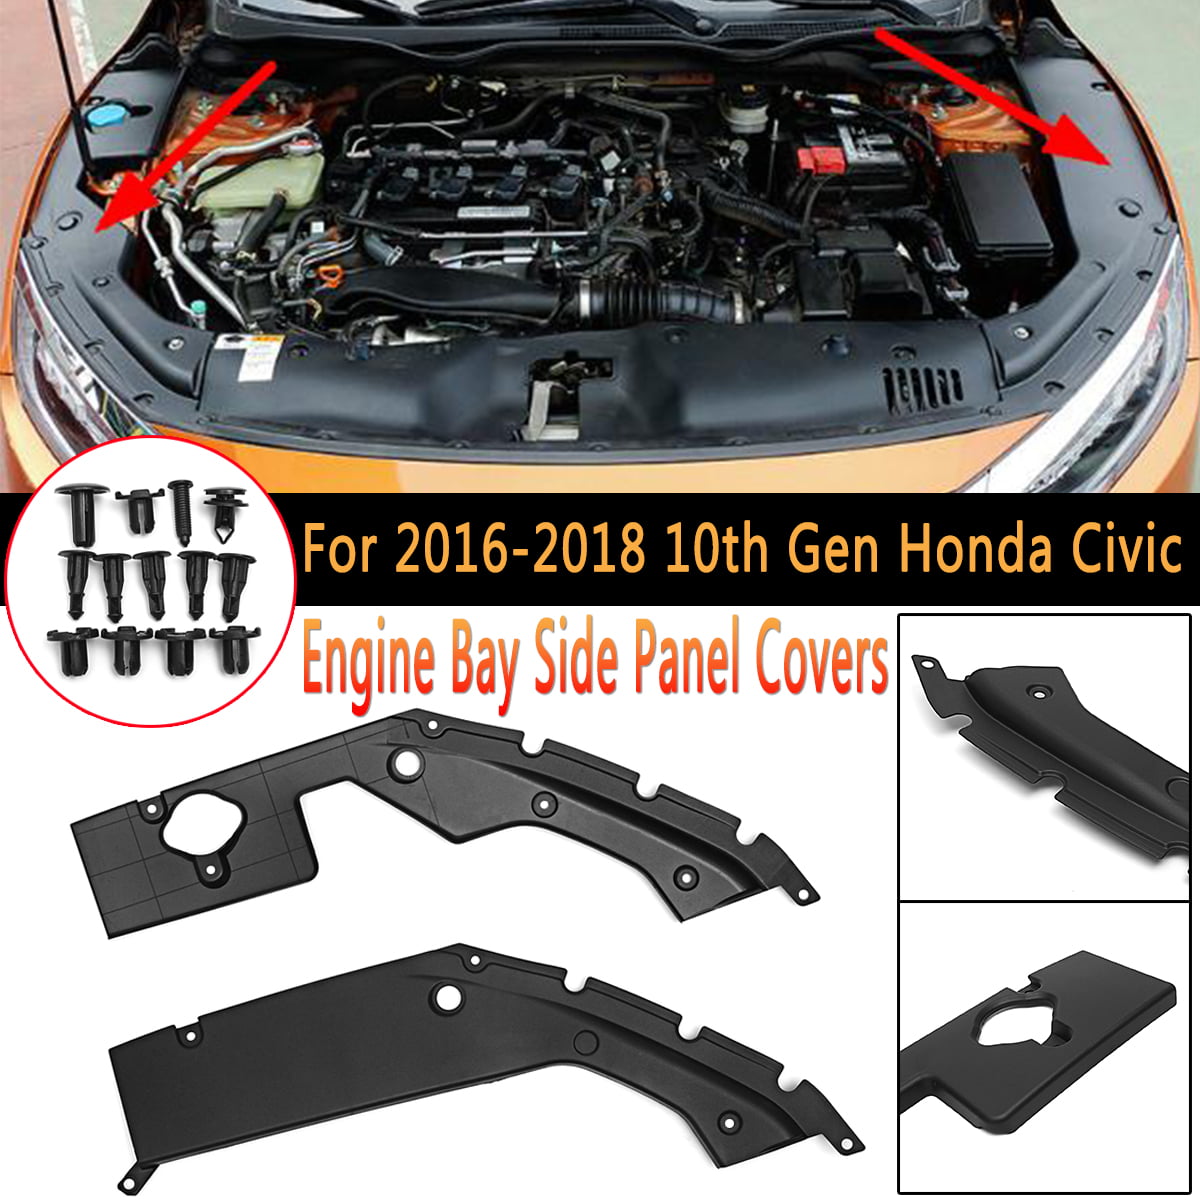 Engine Bay Side Panel Covers For Honda Civic 2016 2017 2018 Unpainted ABS Long Version X Gen 10 Generation Left and Right Pair 